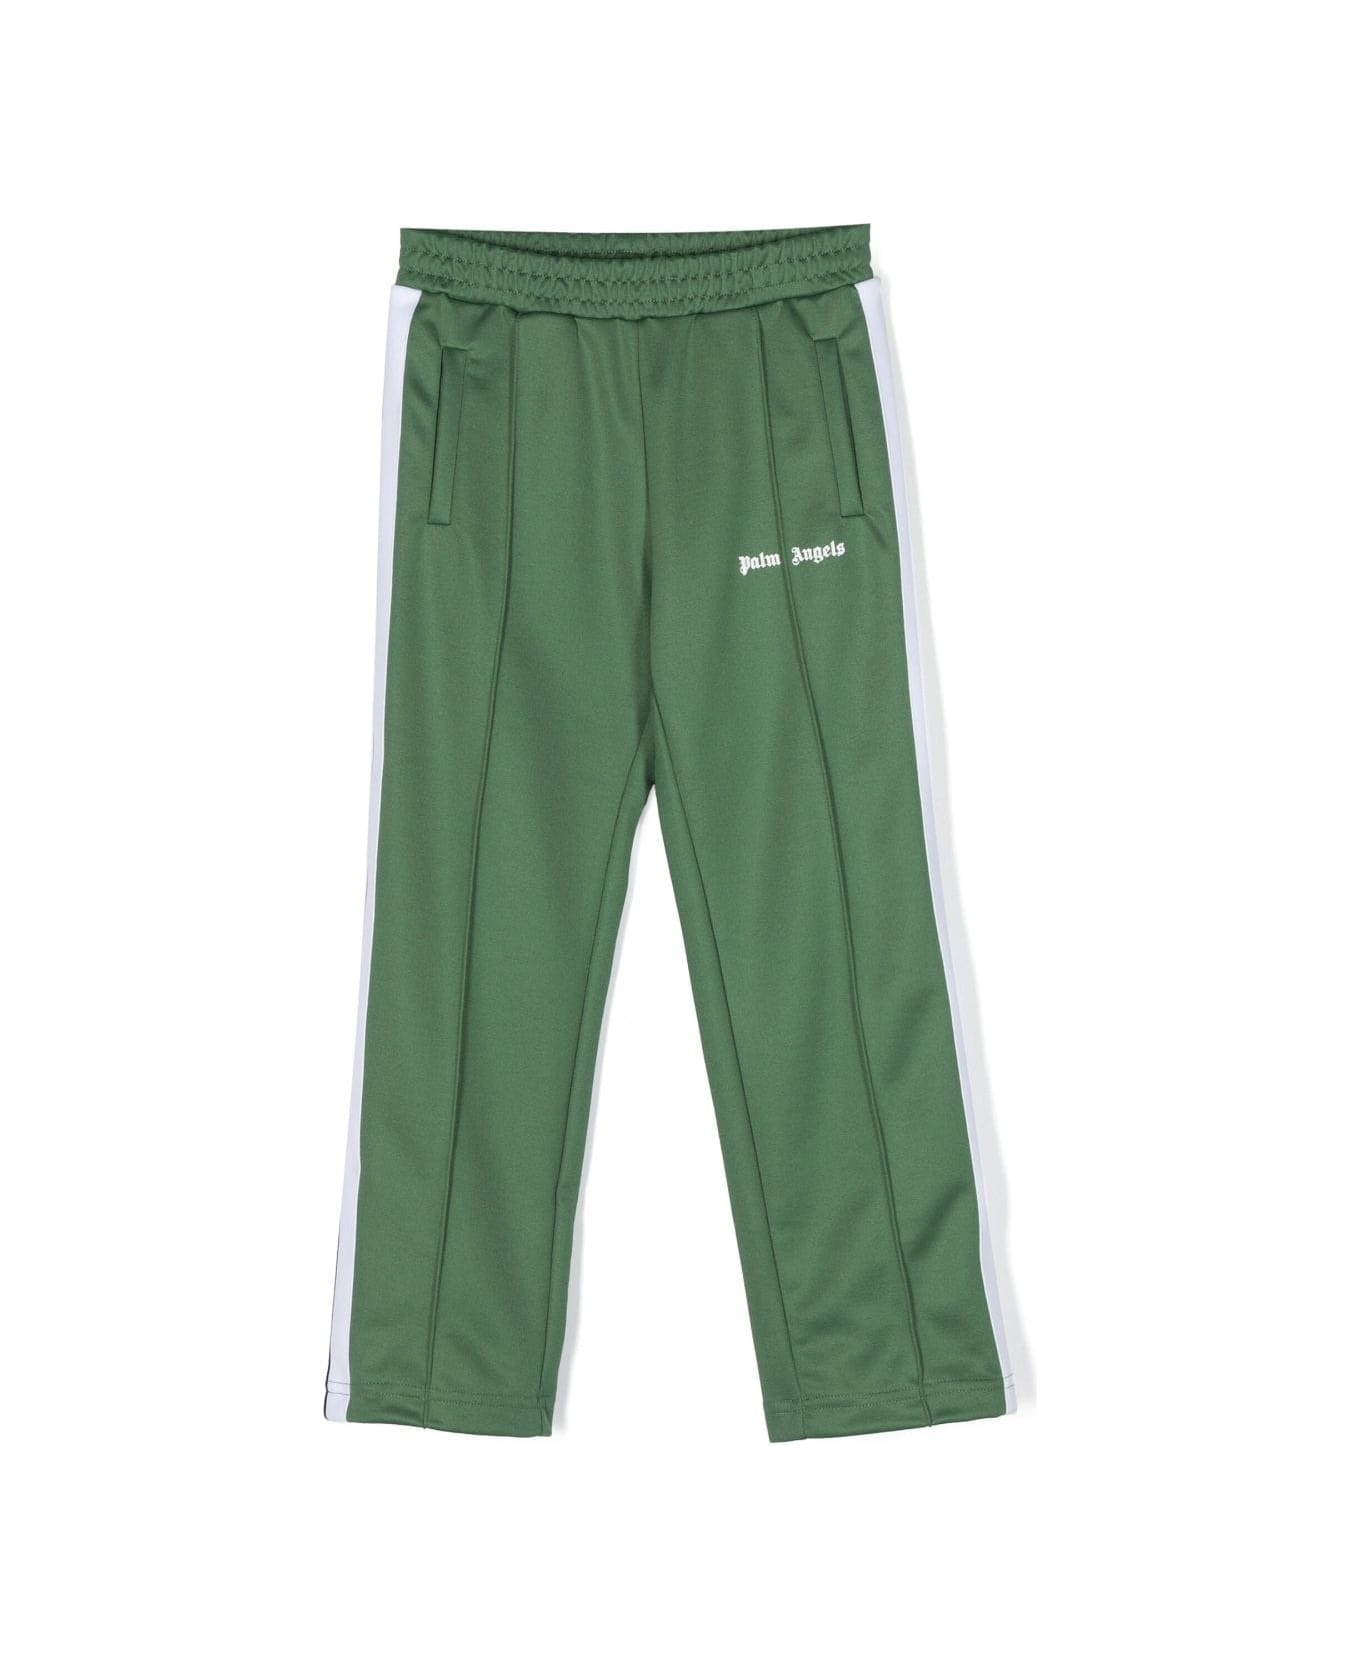 Palm Angels Green Track Trousers With Logo - Green ボトムス